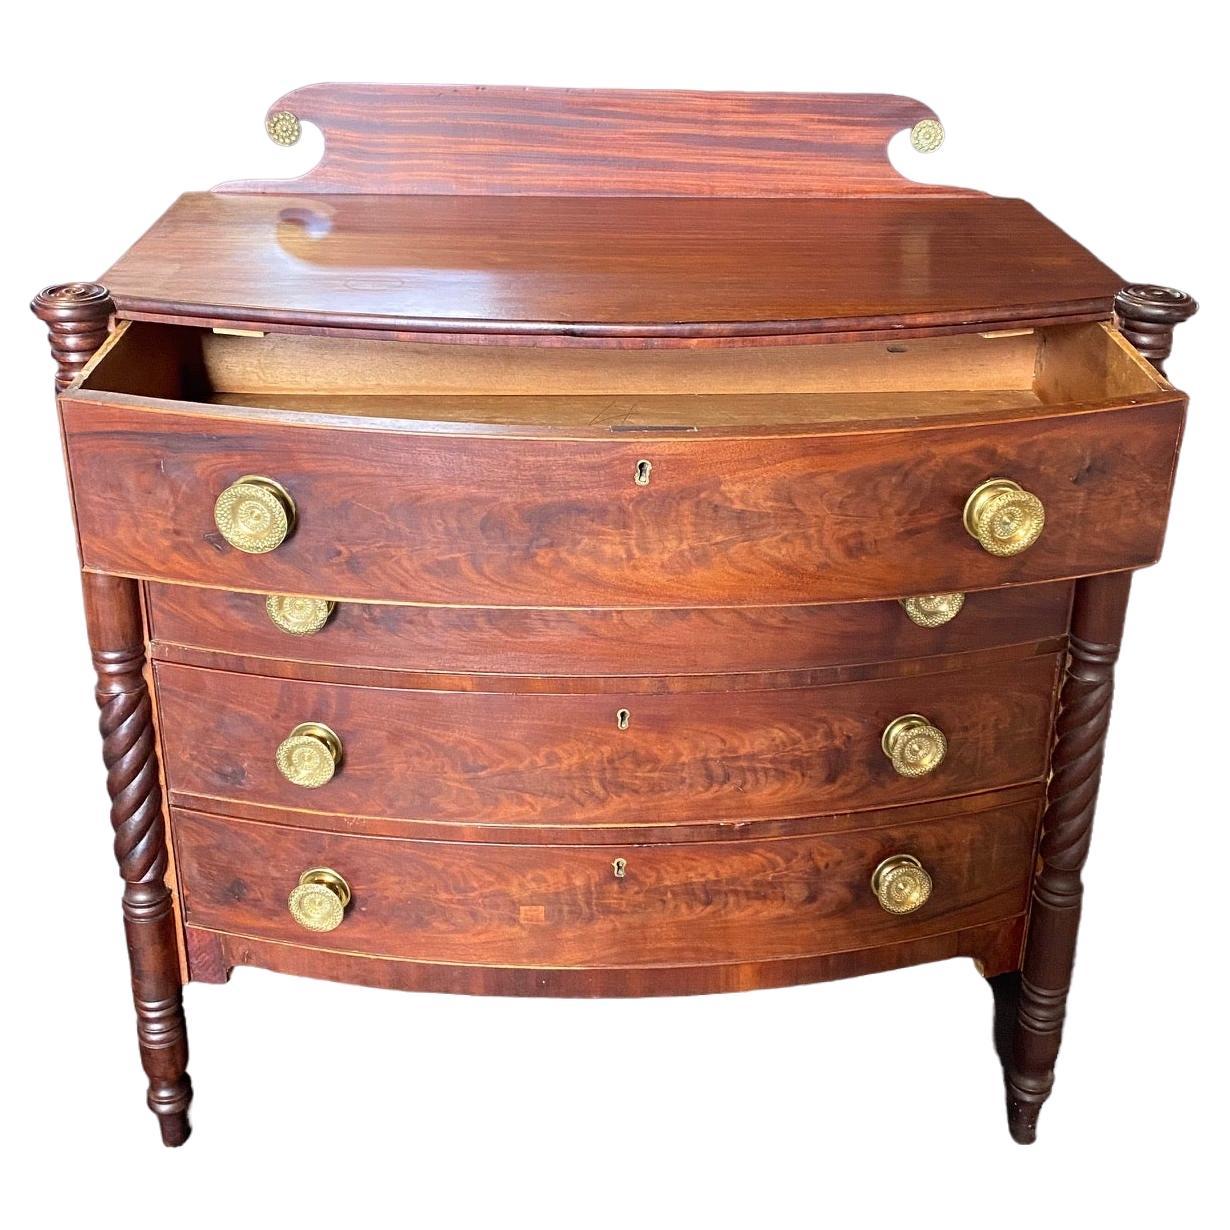 Exceptional early 19th century Sheraton bow front chest of drawers. The case is constructed of lovely flame mahogany. There are four drawers all fitted with the stunningly detailed original brass pulls. The gorgeous flamed top has a nice scroll back